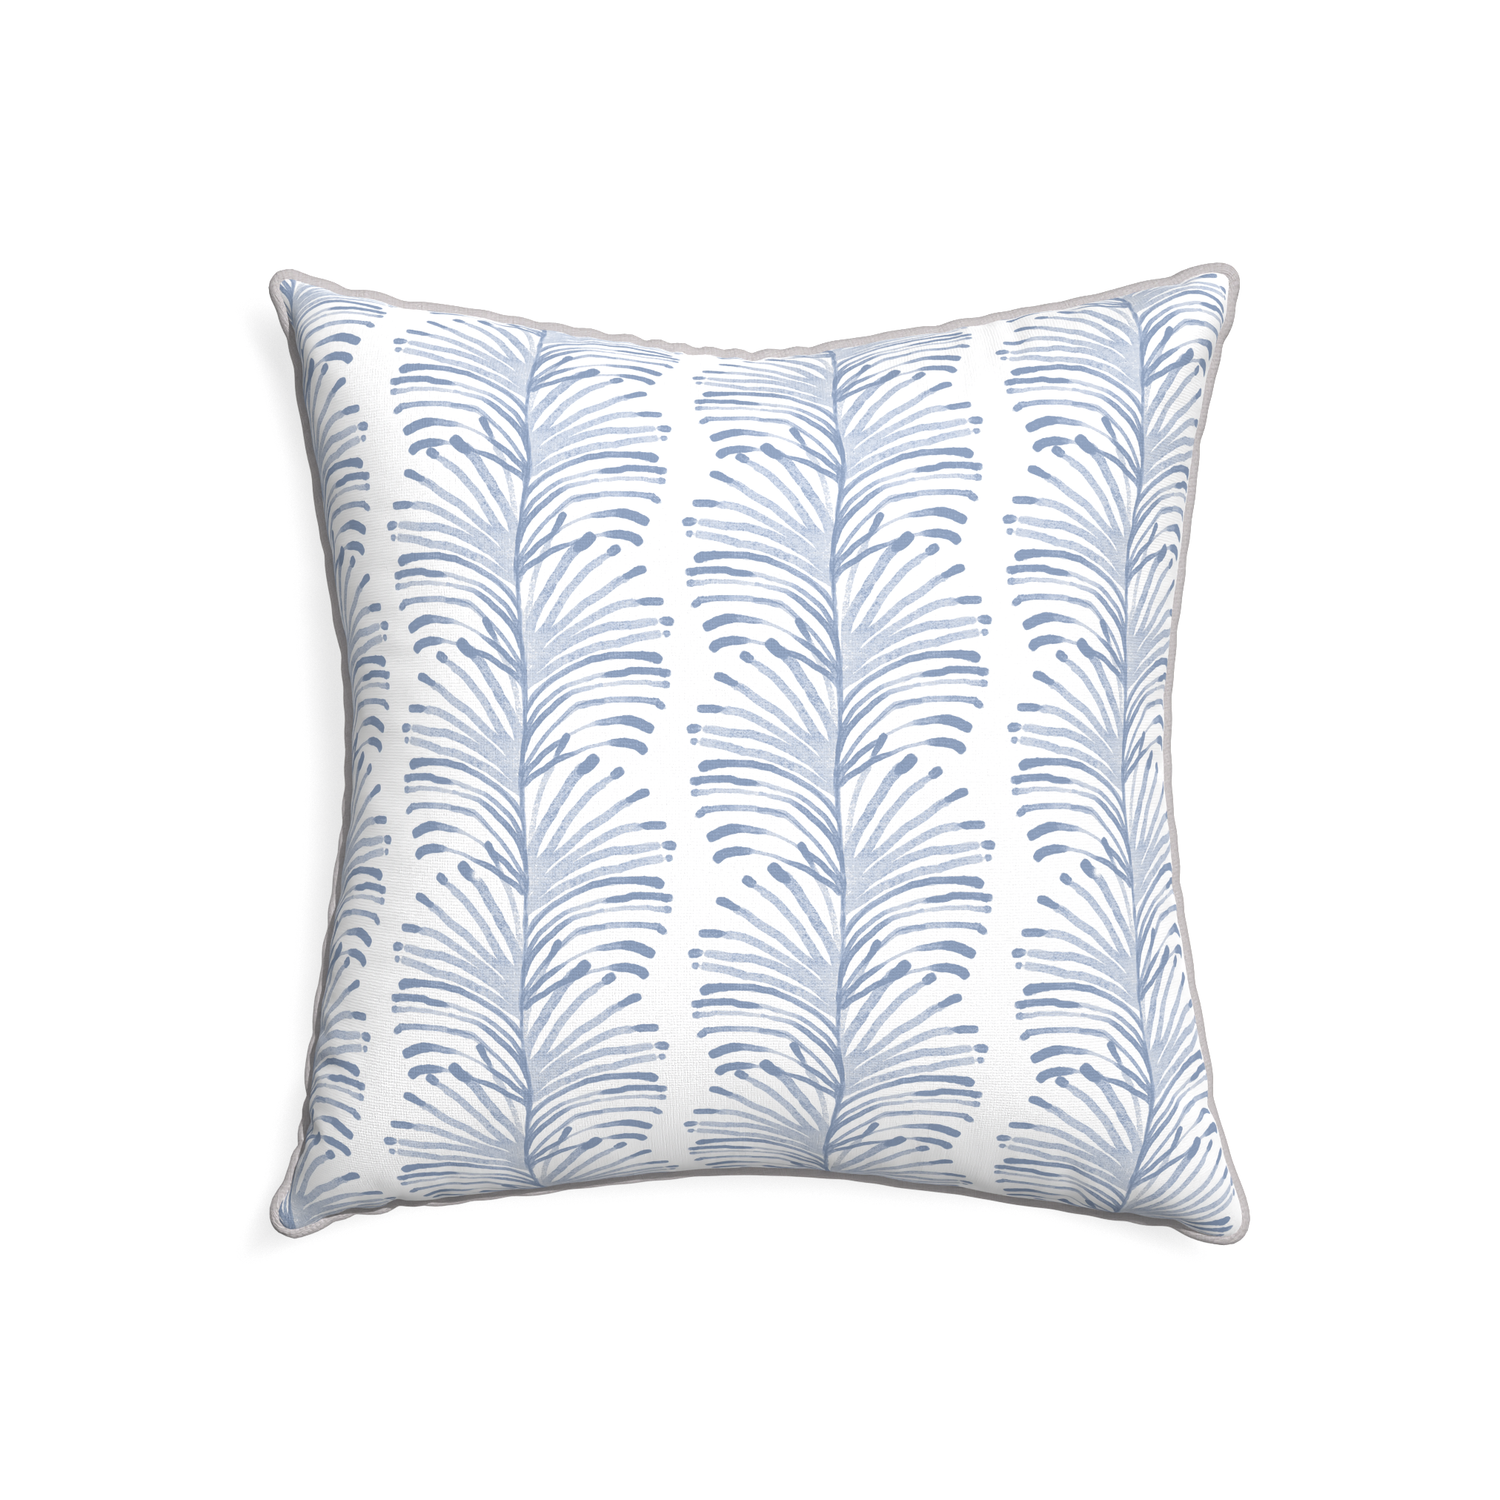 22-square emma sky custom pillow with pebble piping on white background